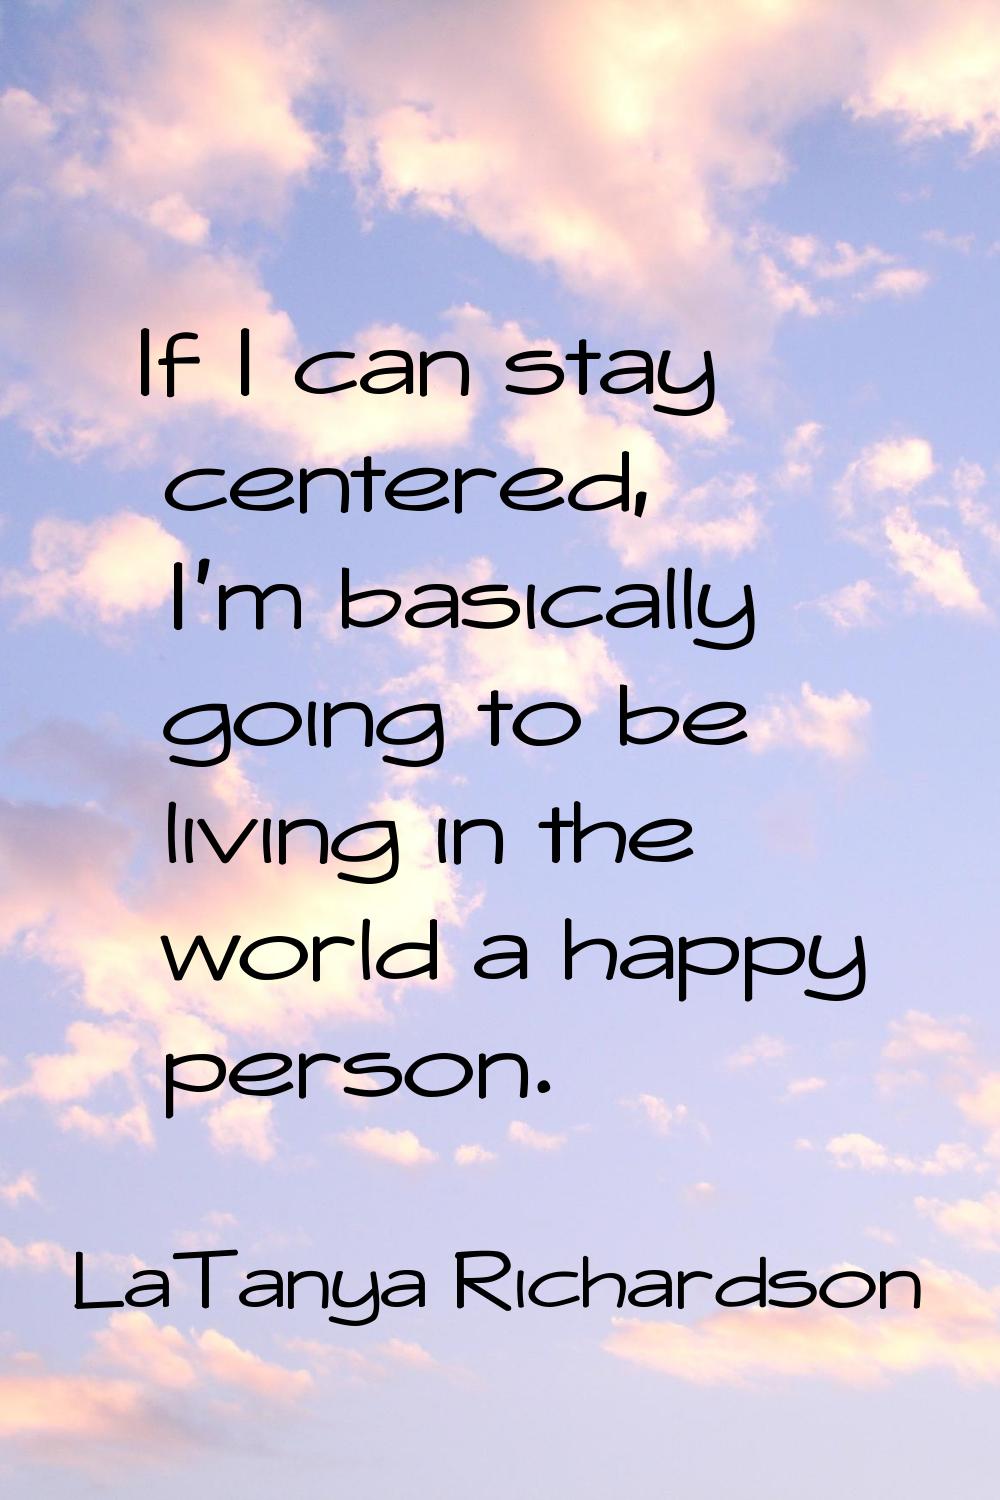 If I can stay centered, I'm basically going to be living in the world a happy person.